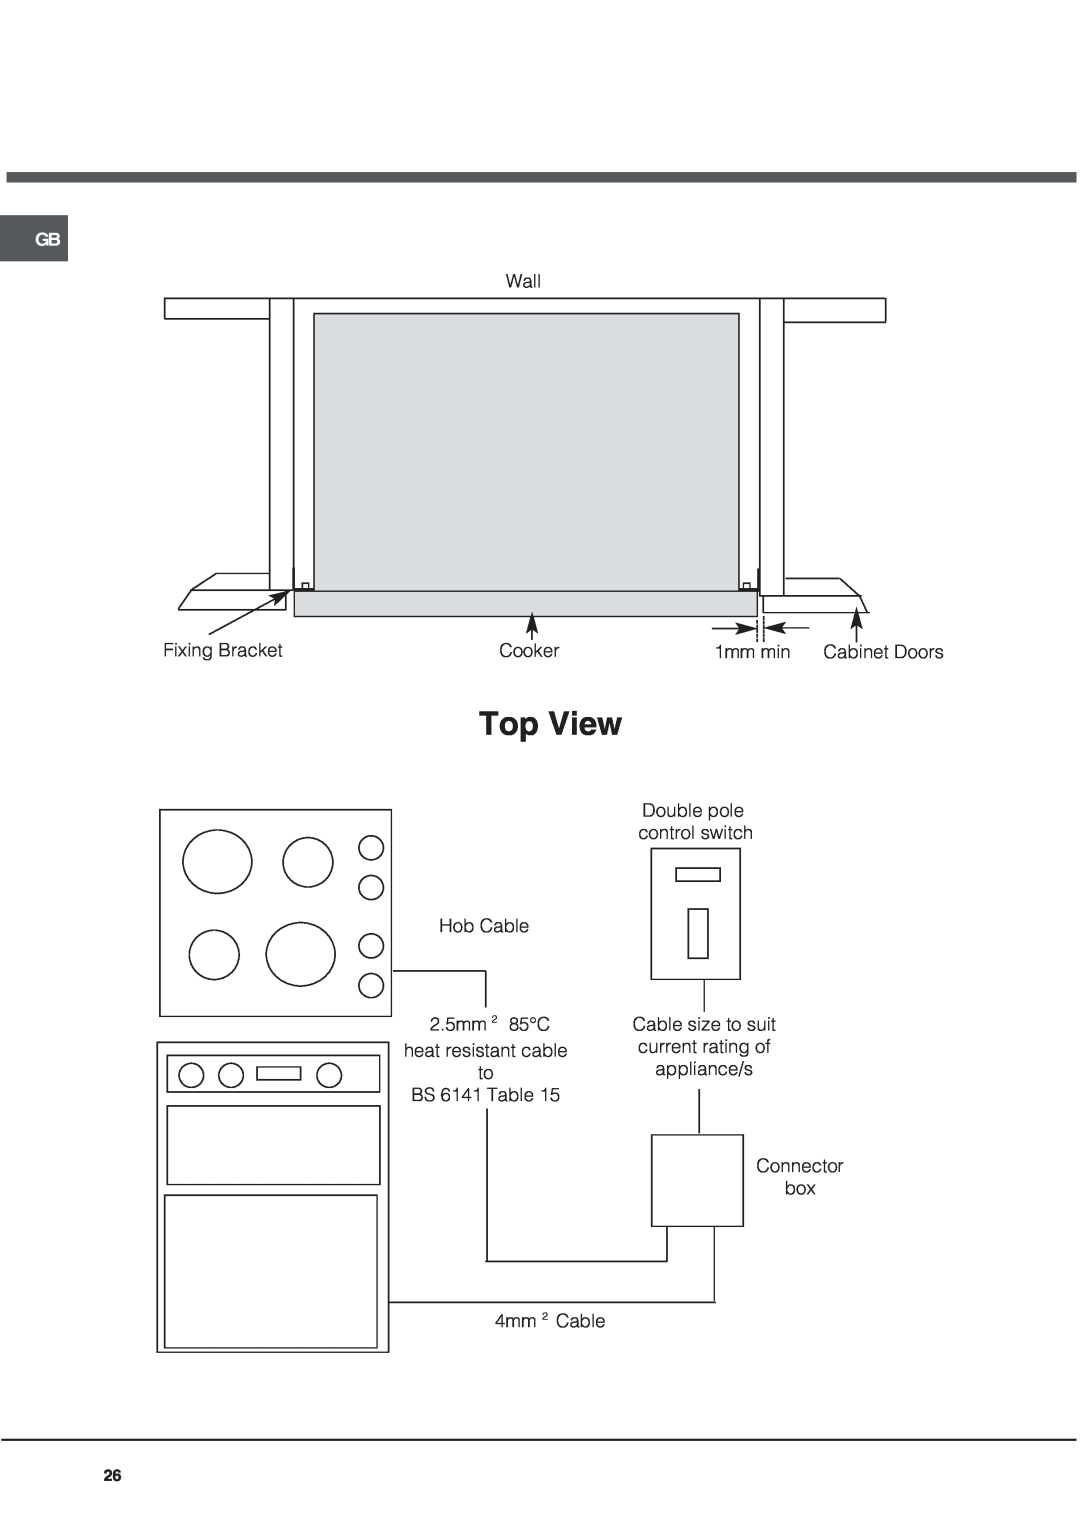 Hotpoint UQ89I manual Top View, Wall, Fixing Bracket, Cooker, 1mm min, Hob Cable, 2.5mm 2 85C, appliance/s, BS 6141 Table 